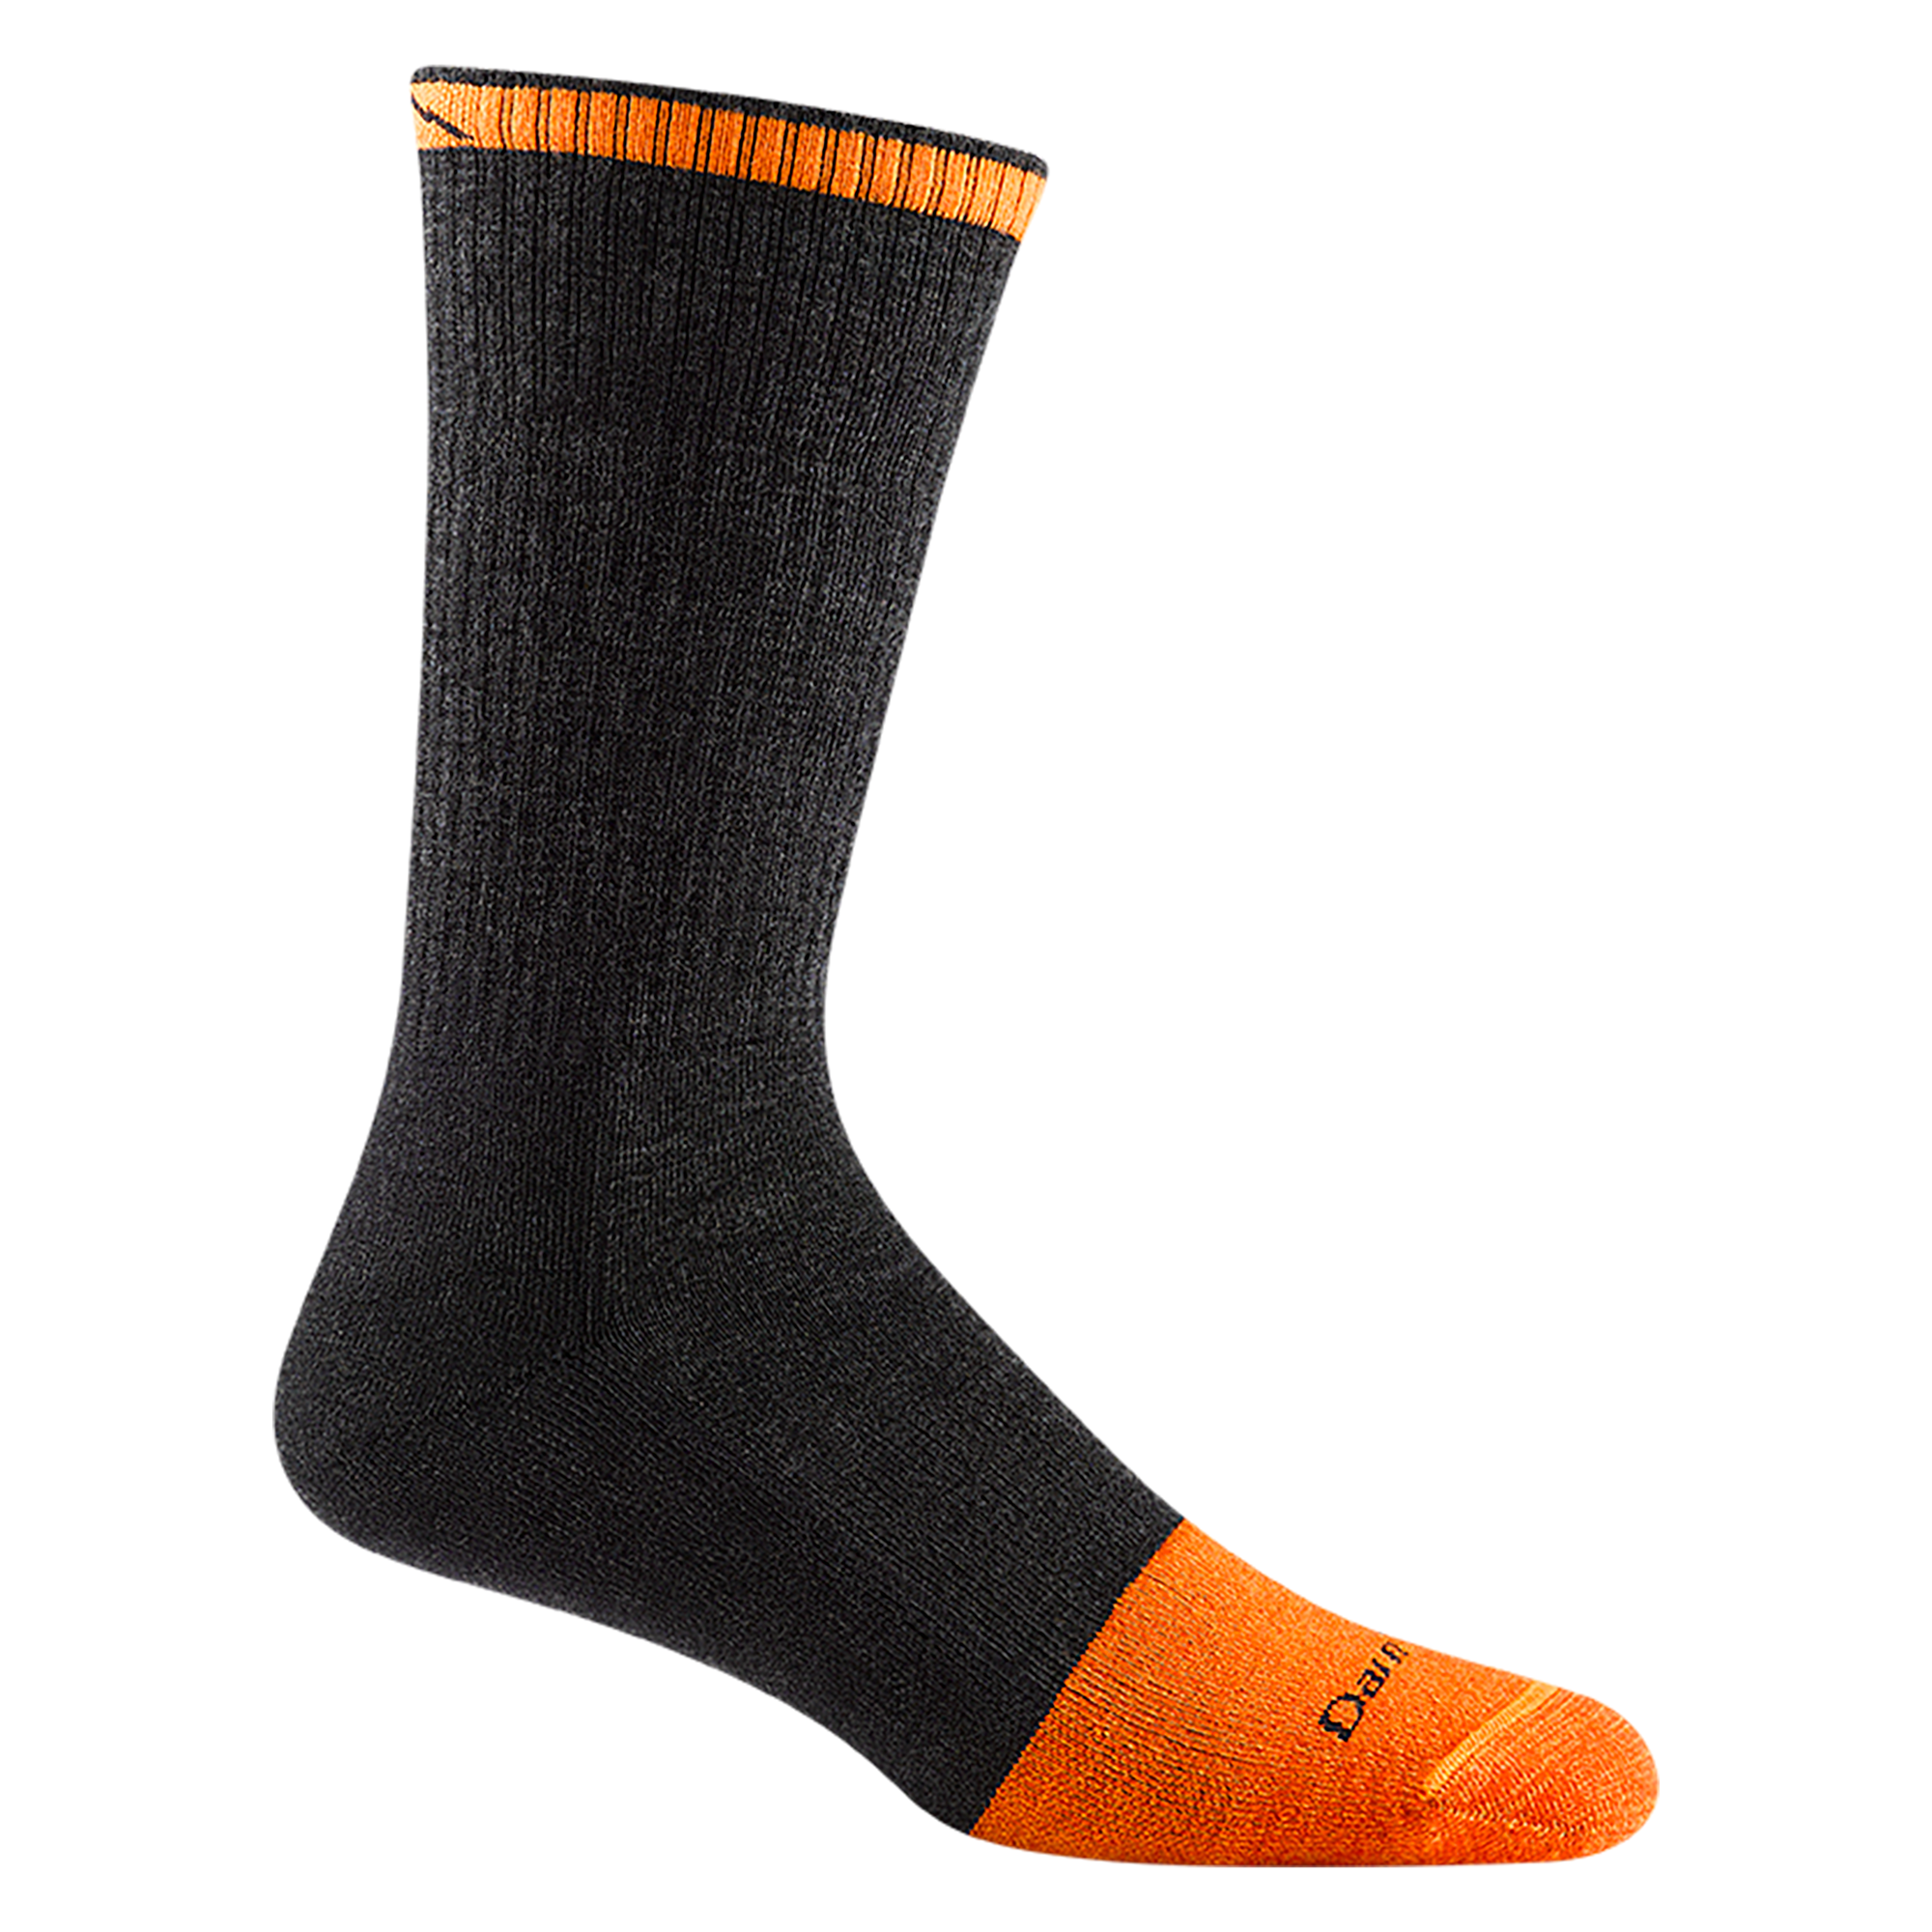 2006 men's steely boot work sock in graphite gray with orange toe/trim accents and black darn tough signature on forefoot